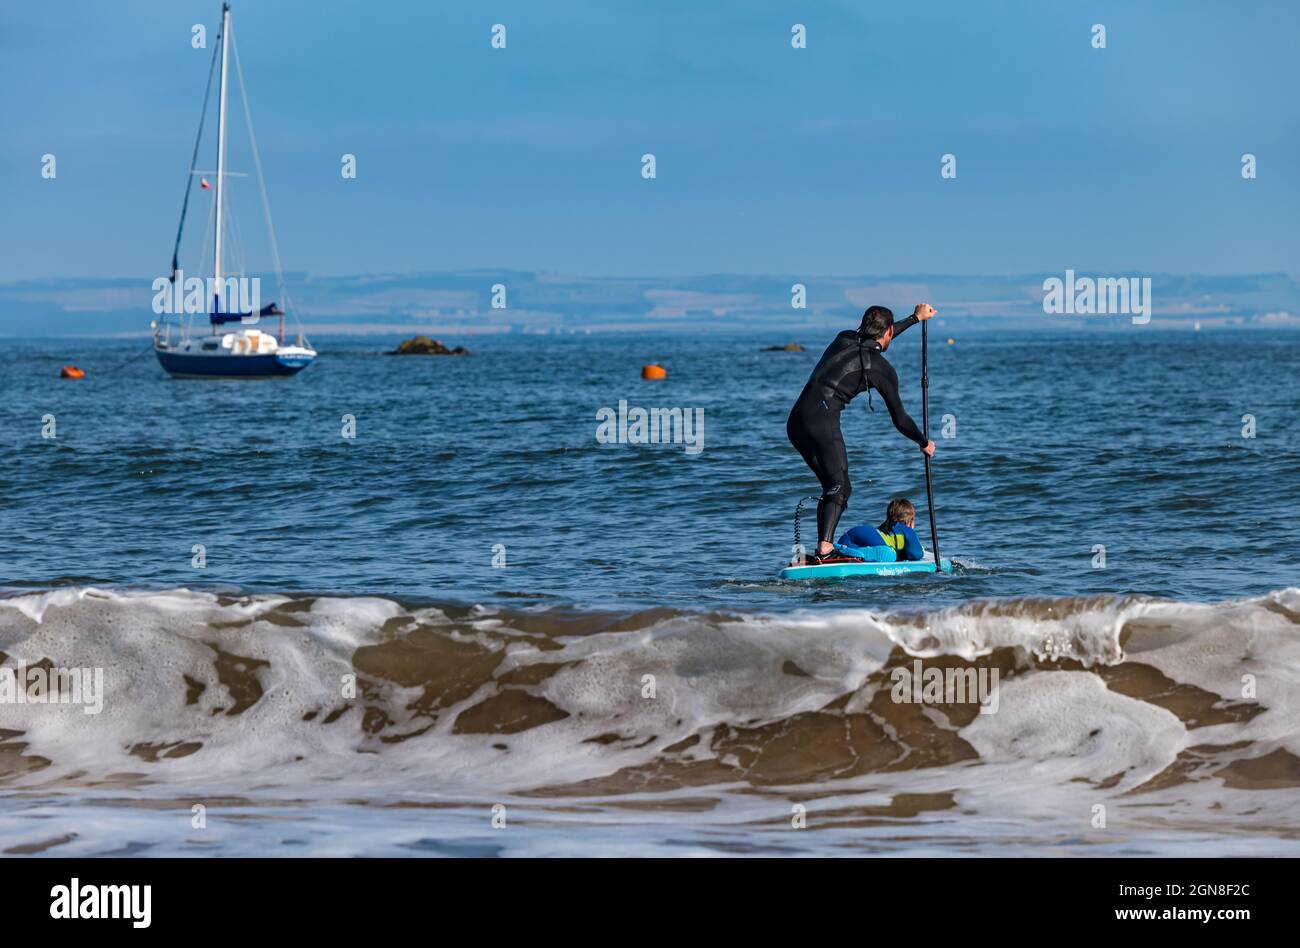 Man and boy paddle boarding in waves on beach in sunshine, North Berwick, East Lothian, Scotland, UK Stock Photo